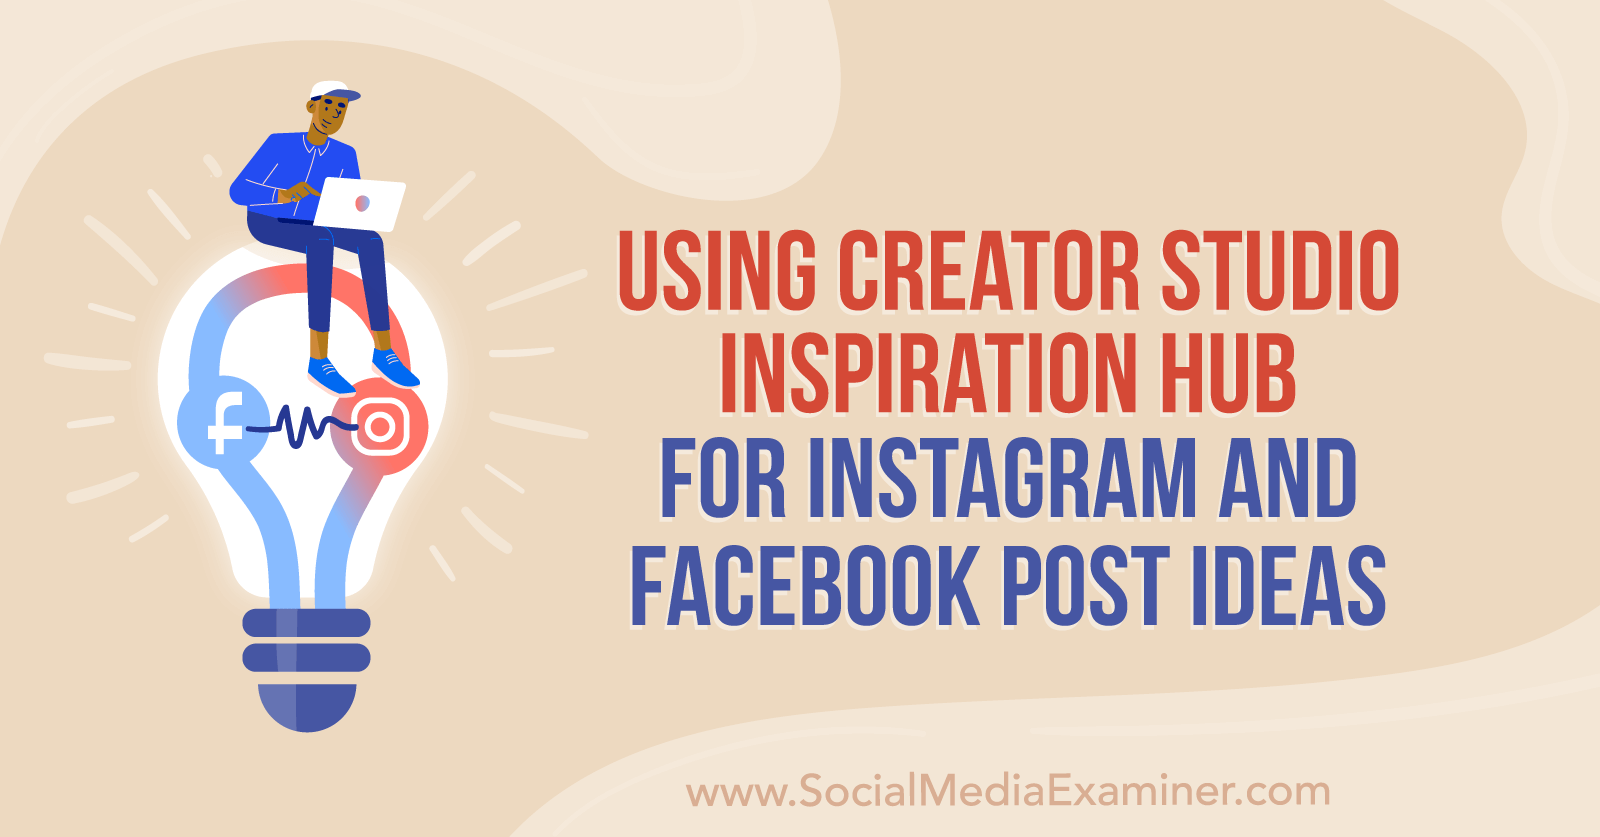 How to Use Creator Studio for Facebook and Instagram